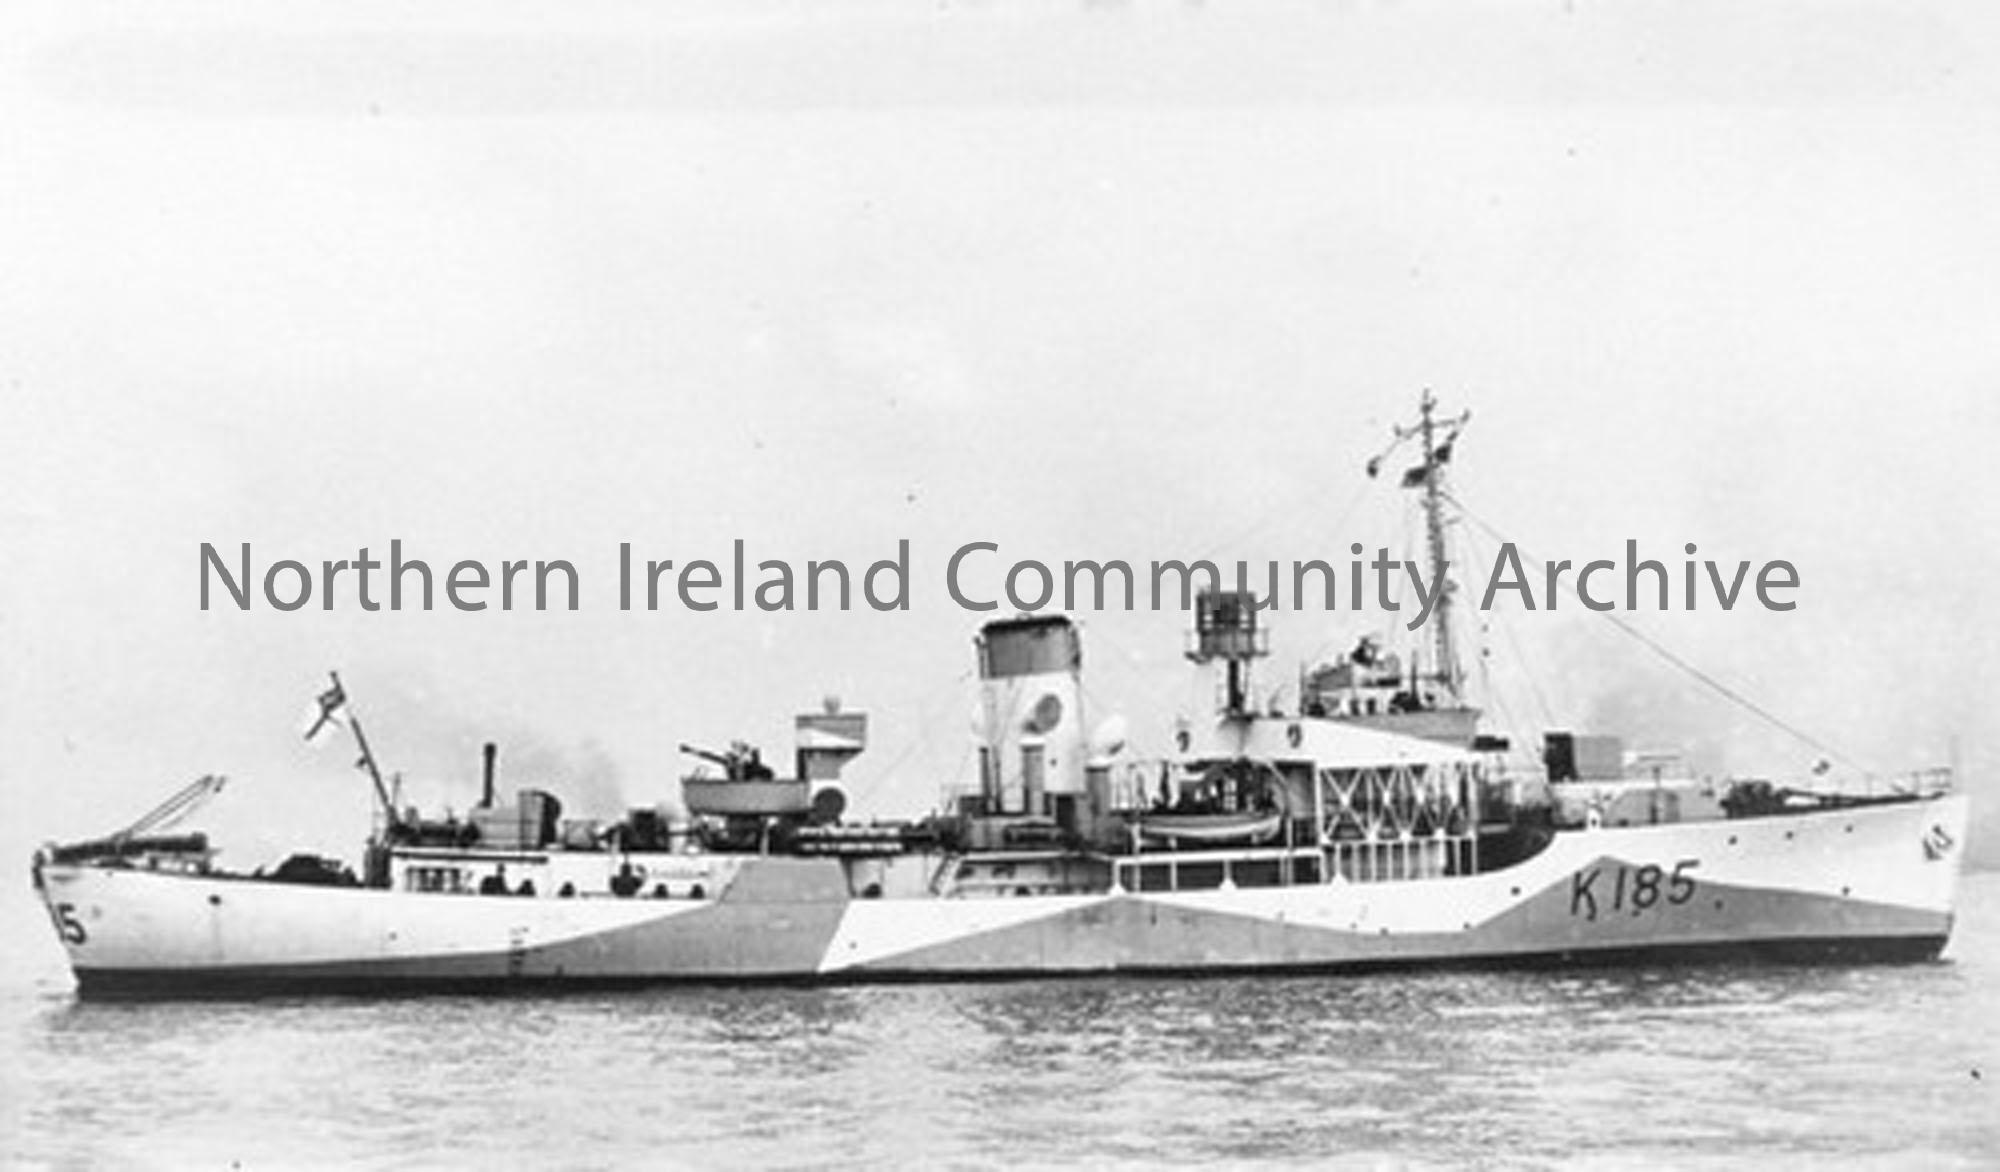 HMS Alisma.
K 185 
H&W ship number 1096
Launched: 17 Dec, 1940 
Commissioned: 13 Feb, 1941 
 (6361)